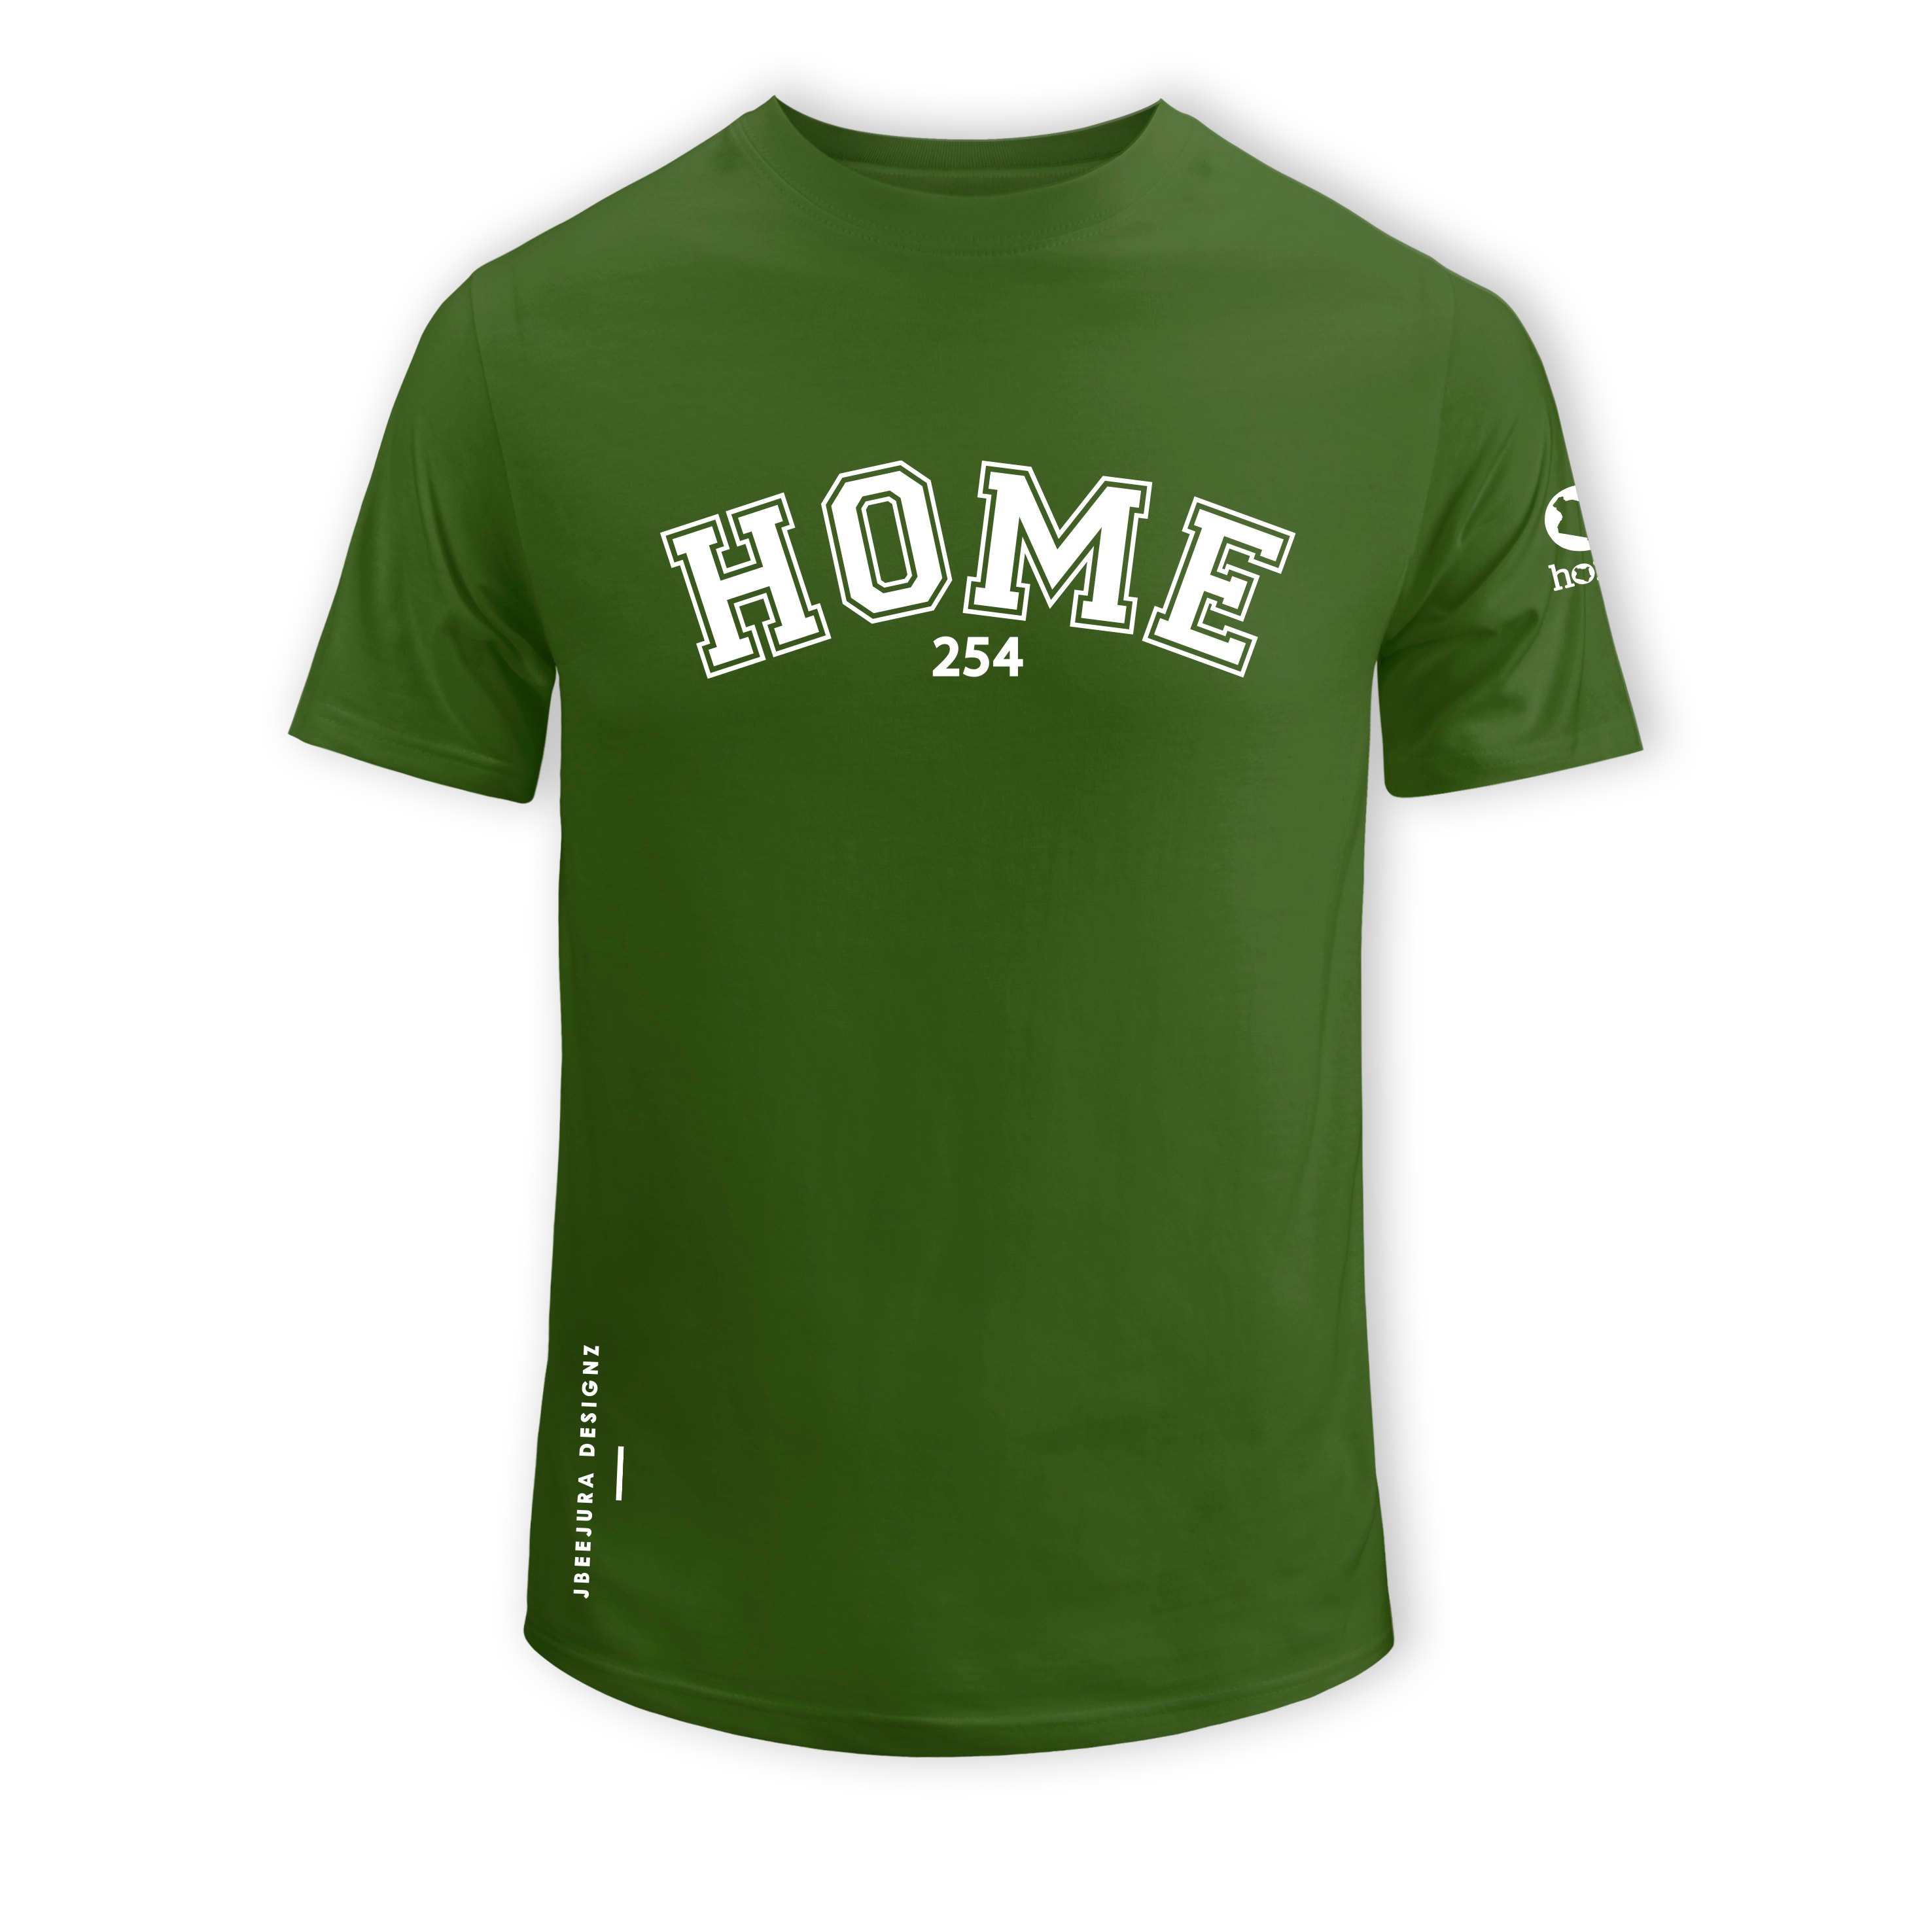  home_254 SHORT-SLEEVED JUNGLE GREEN T-SHIRT WITH A WHITE COLLEGE PRINT – COTTON PLUS FABRIC